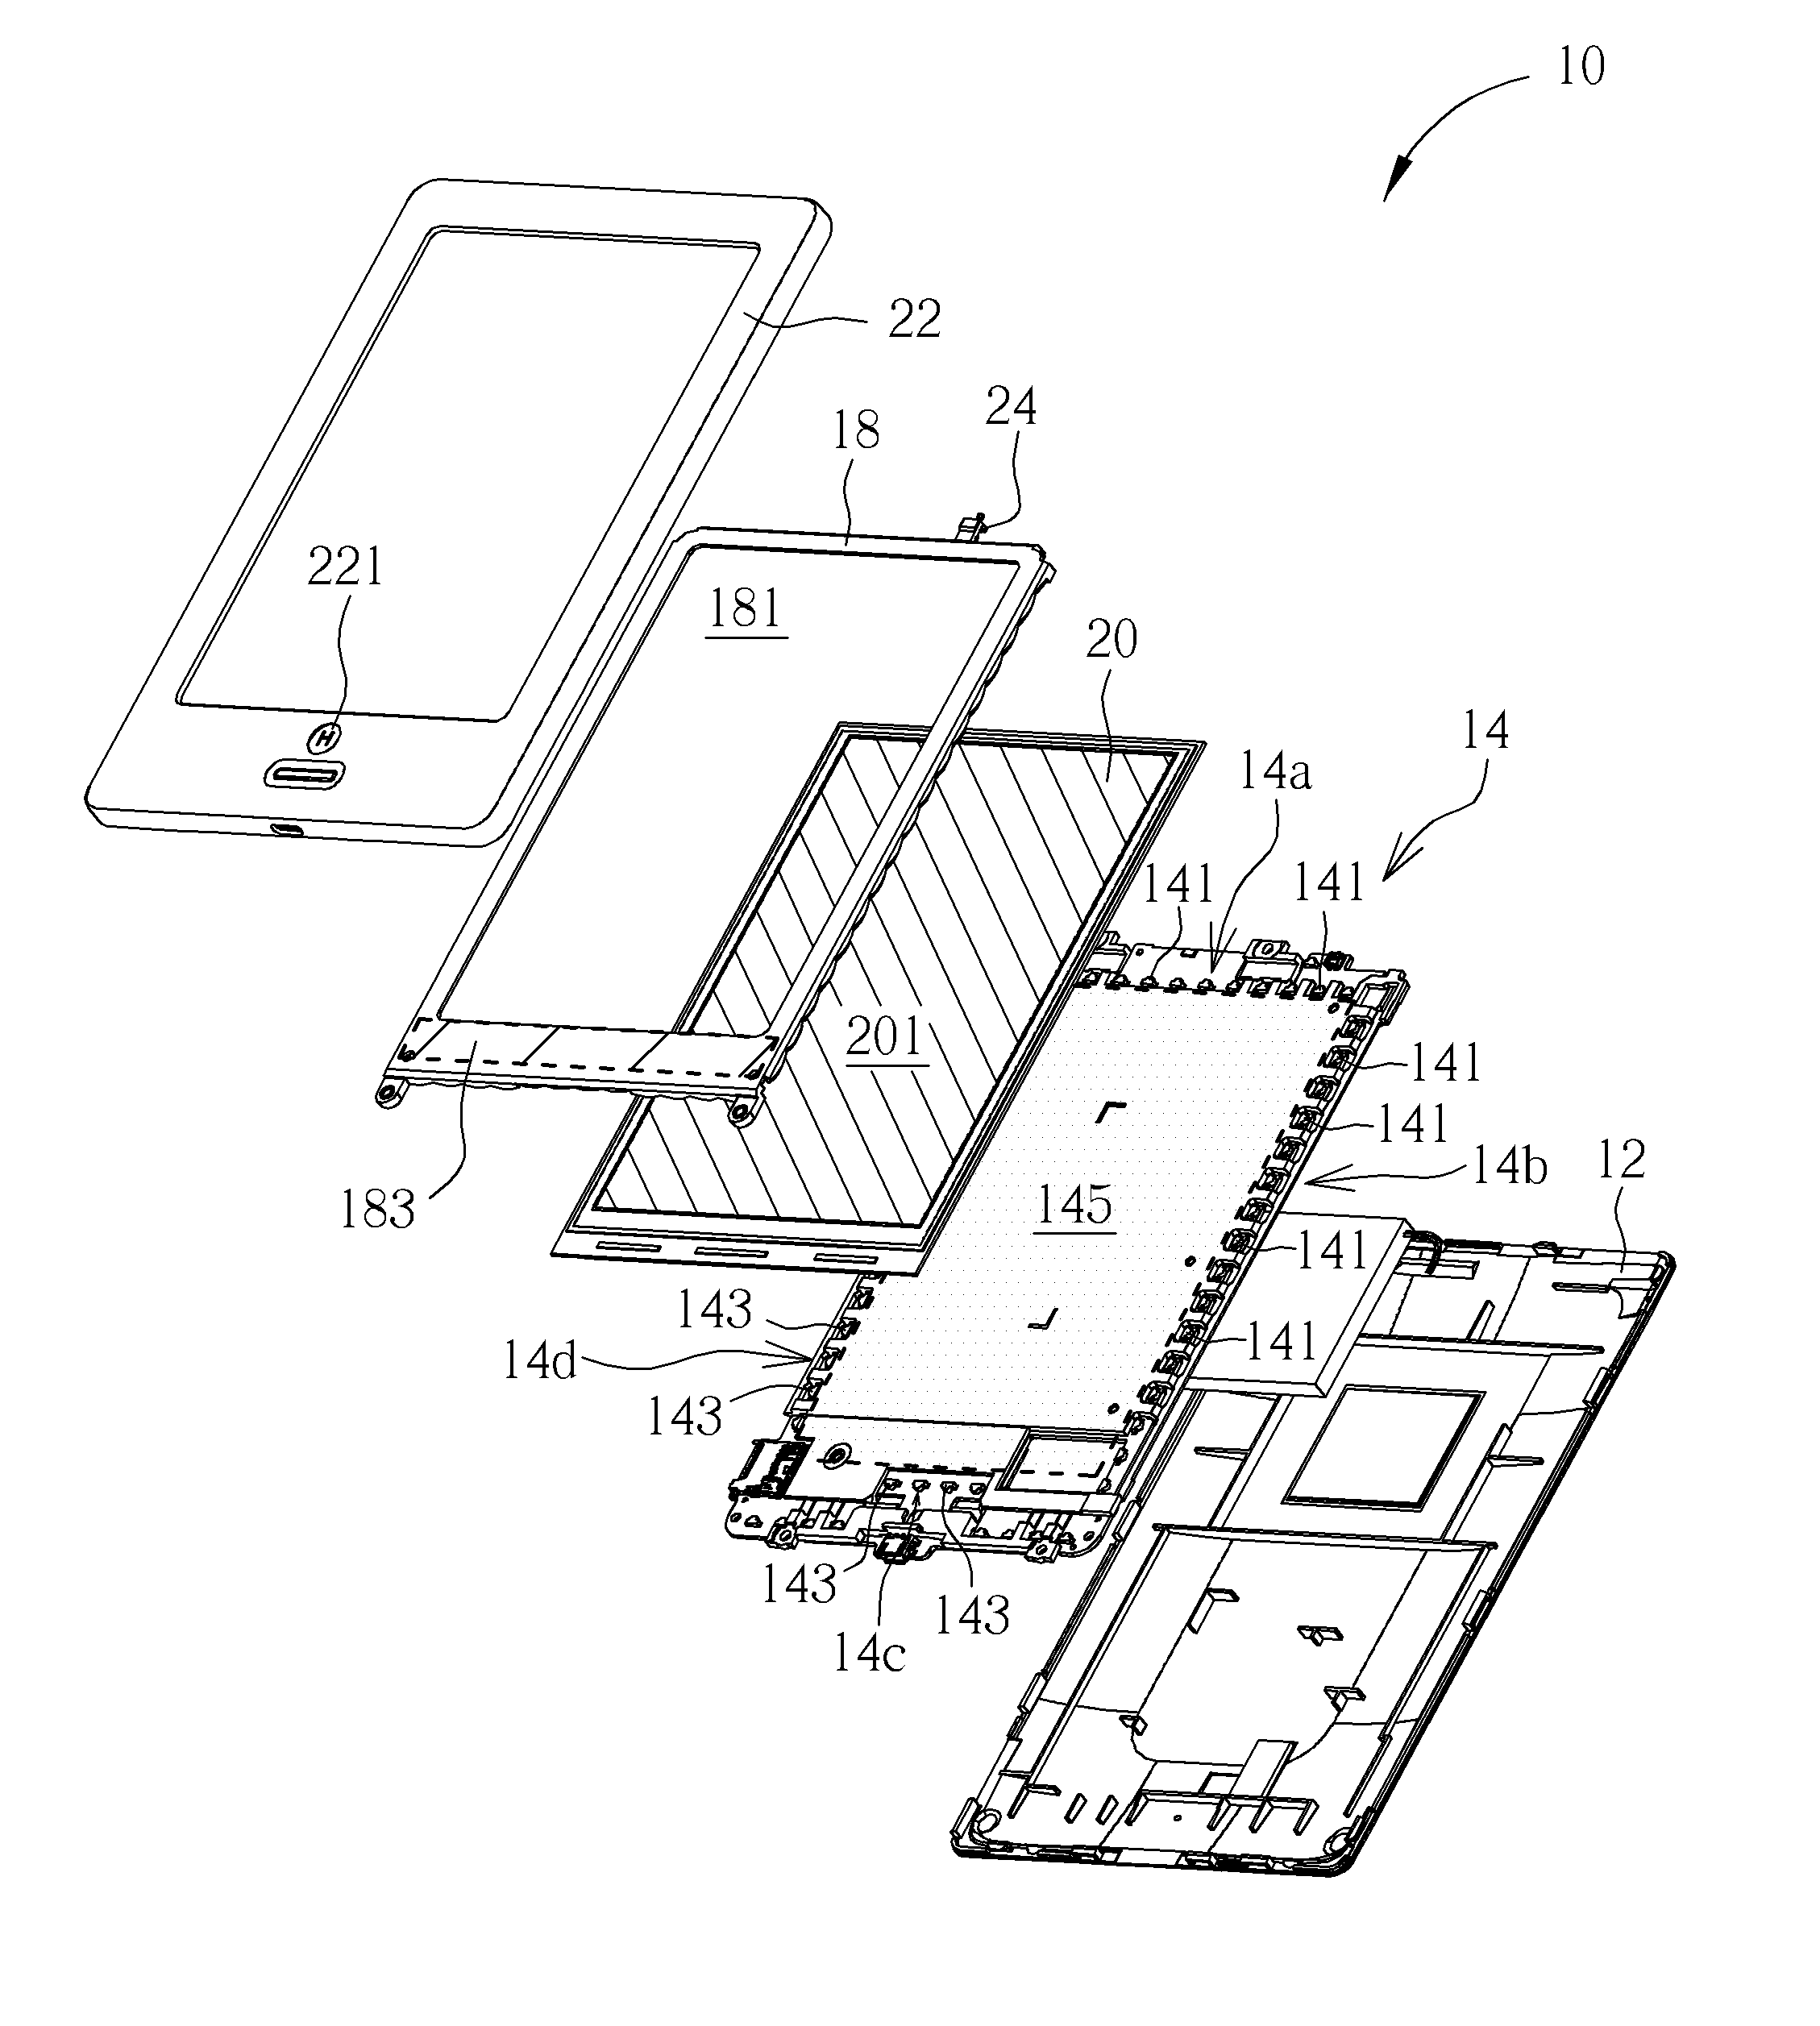 Electronic device with invisible light touch panel